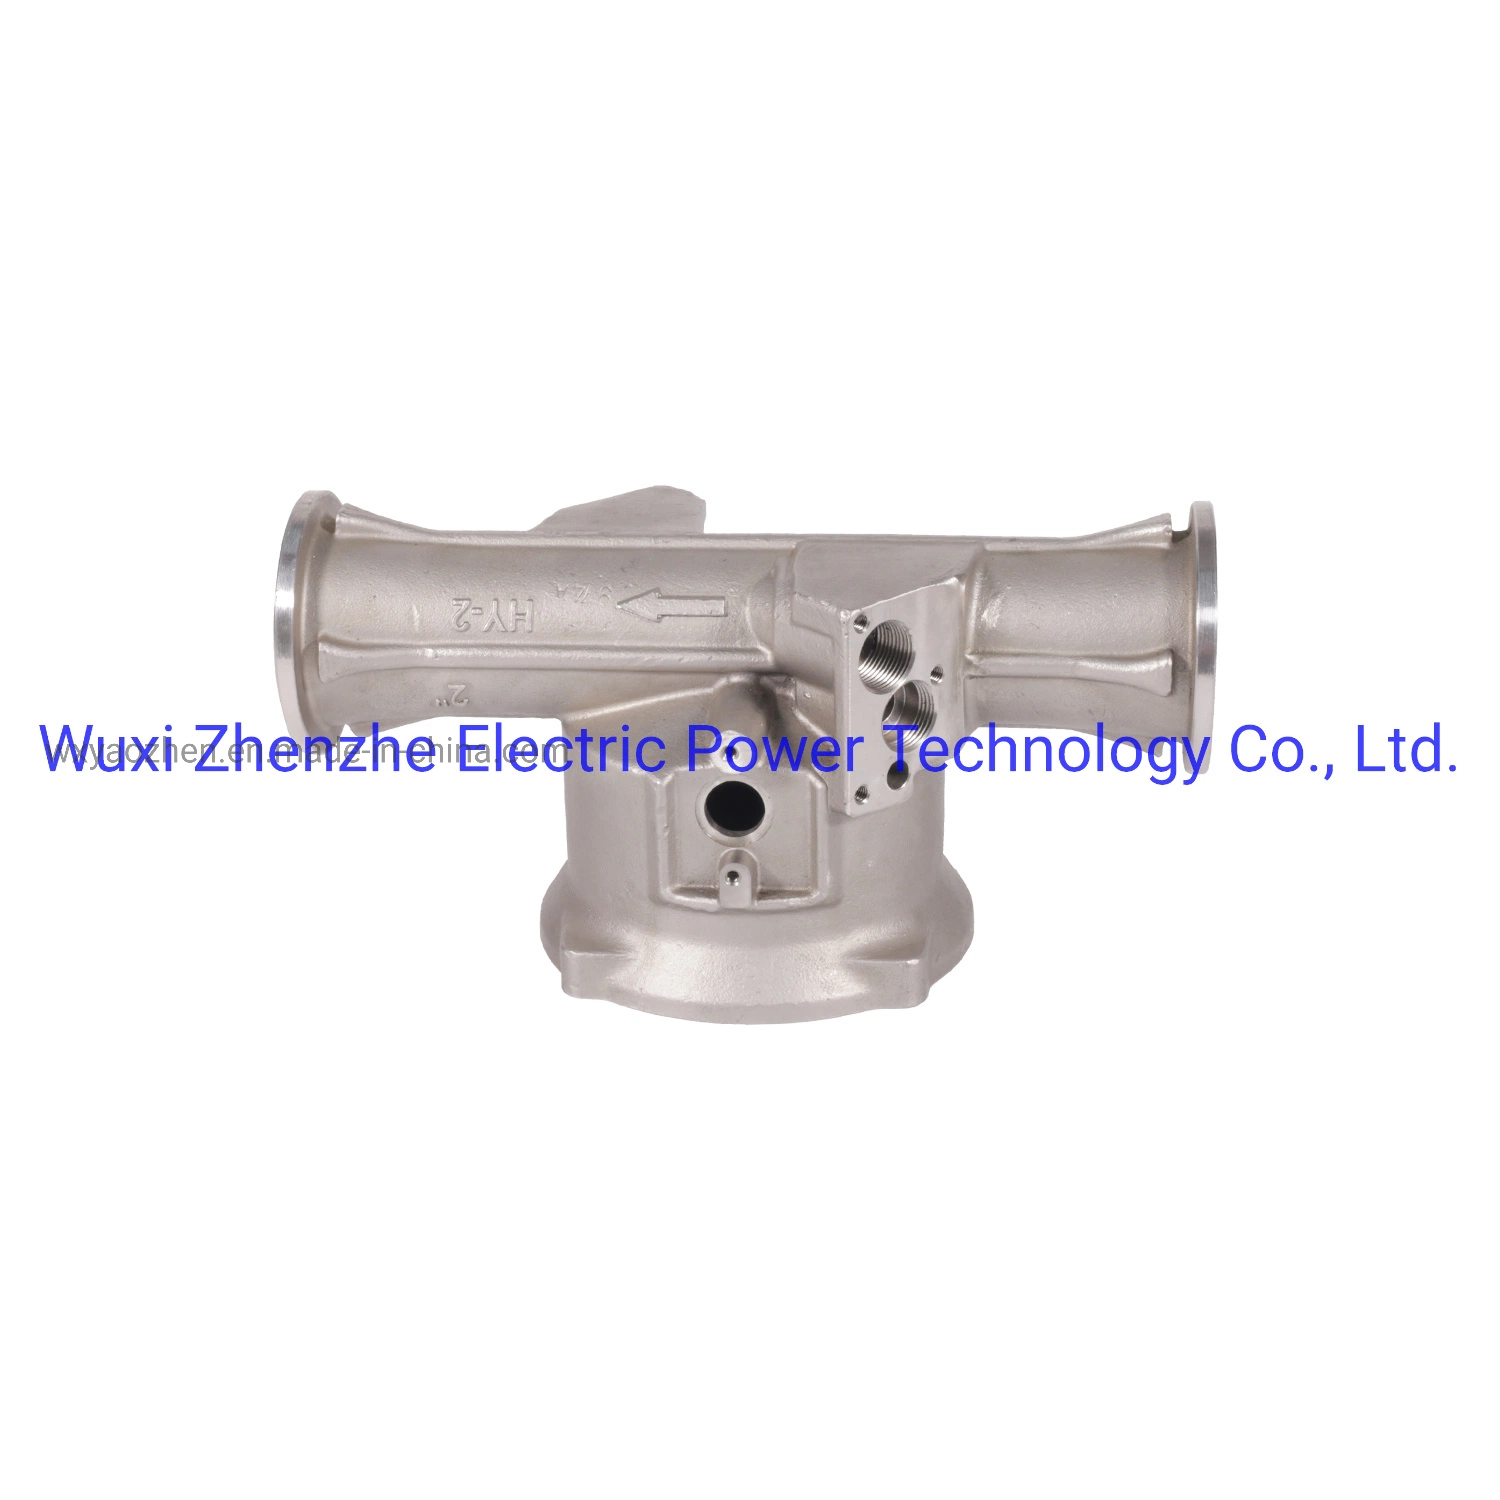 Stainless Steel/Bronze/Brass/Copper/Aluminum Casting Valve Body/Valve Parts/Fittings Made by Investment Casting/Lost Wax Casting